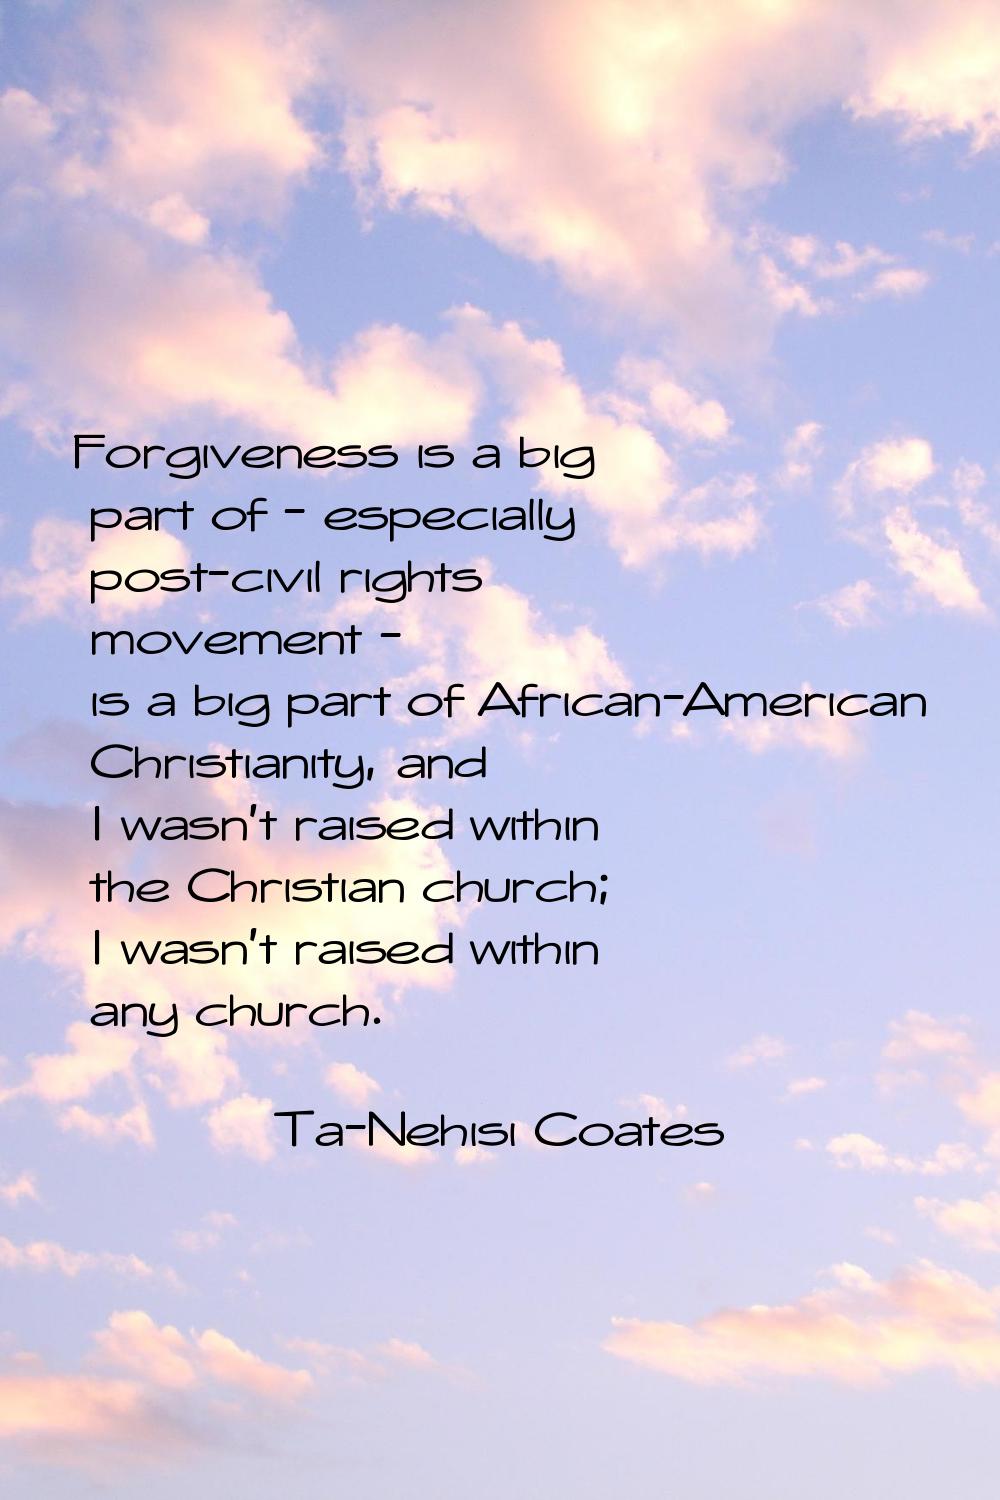 Forgiveness is a big part of - especially post-civil rights movement - is a big part of African-Ame